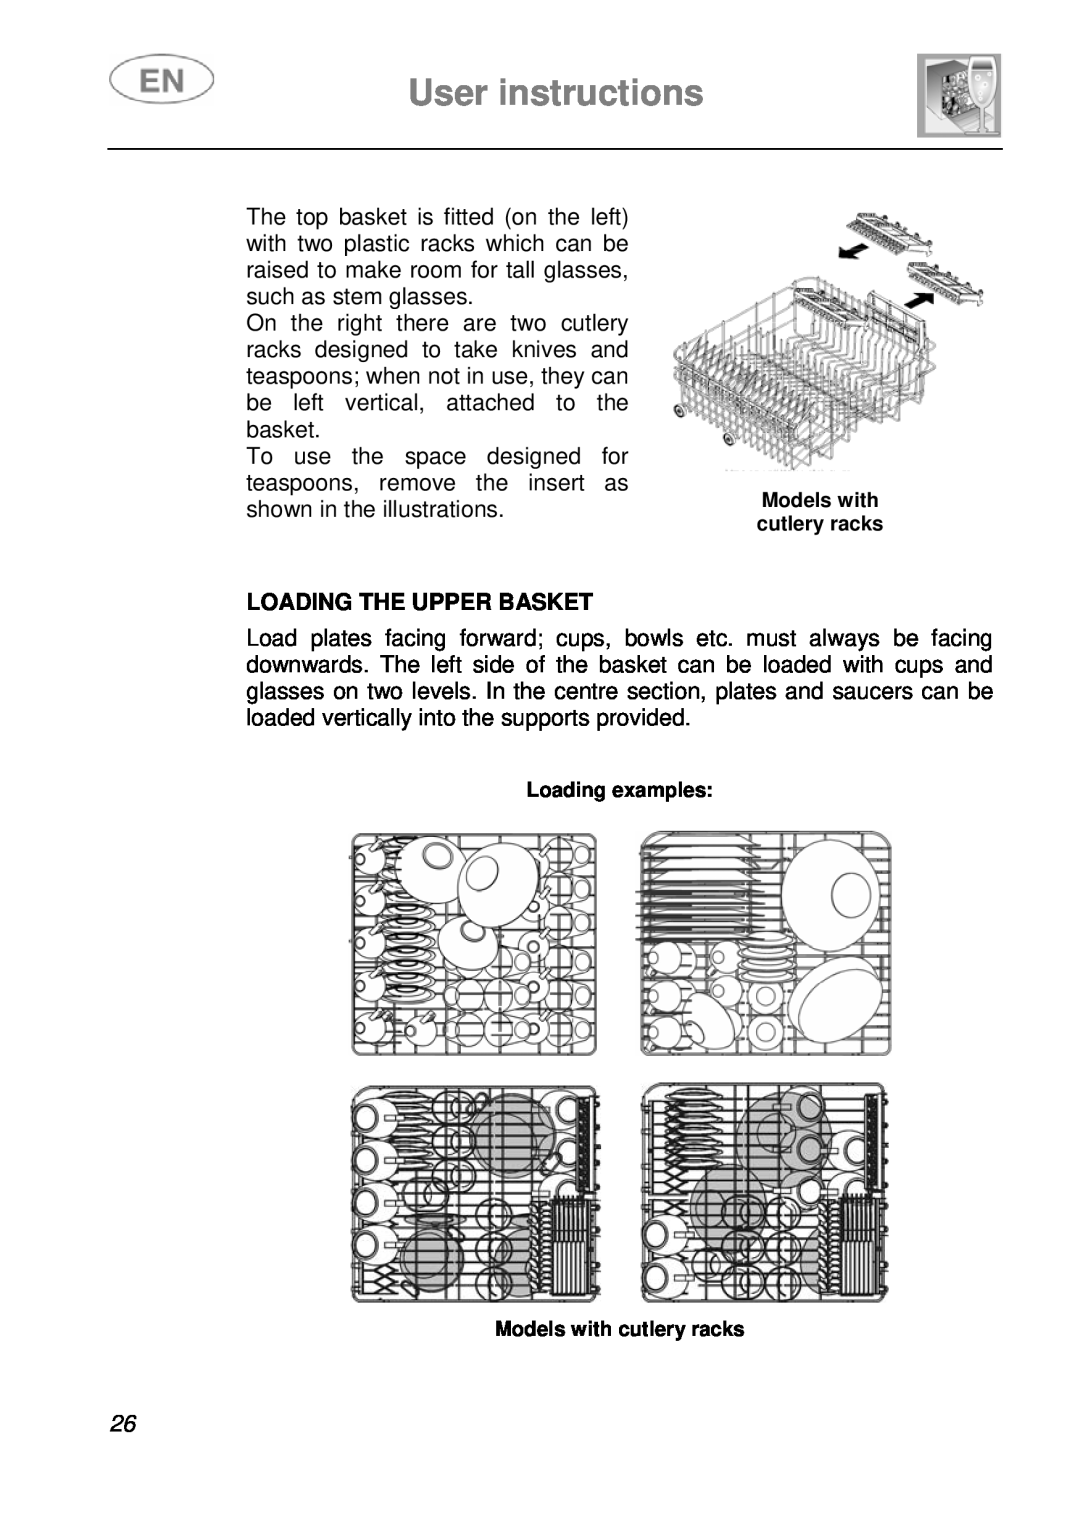 Smeg DI612A1 instruction manual User instructions, Loading The Upper Basket, Loading examples Models with cutlery racks 